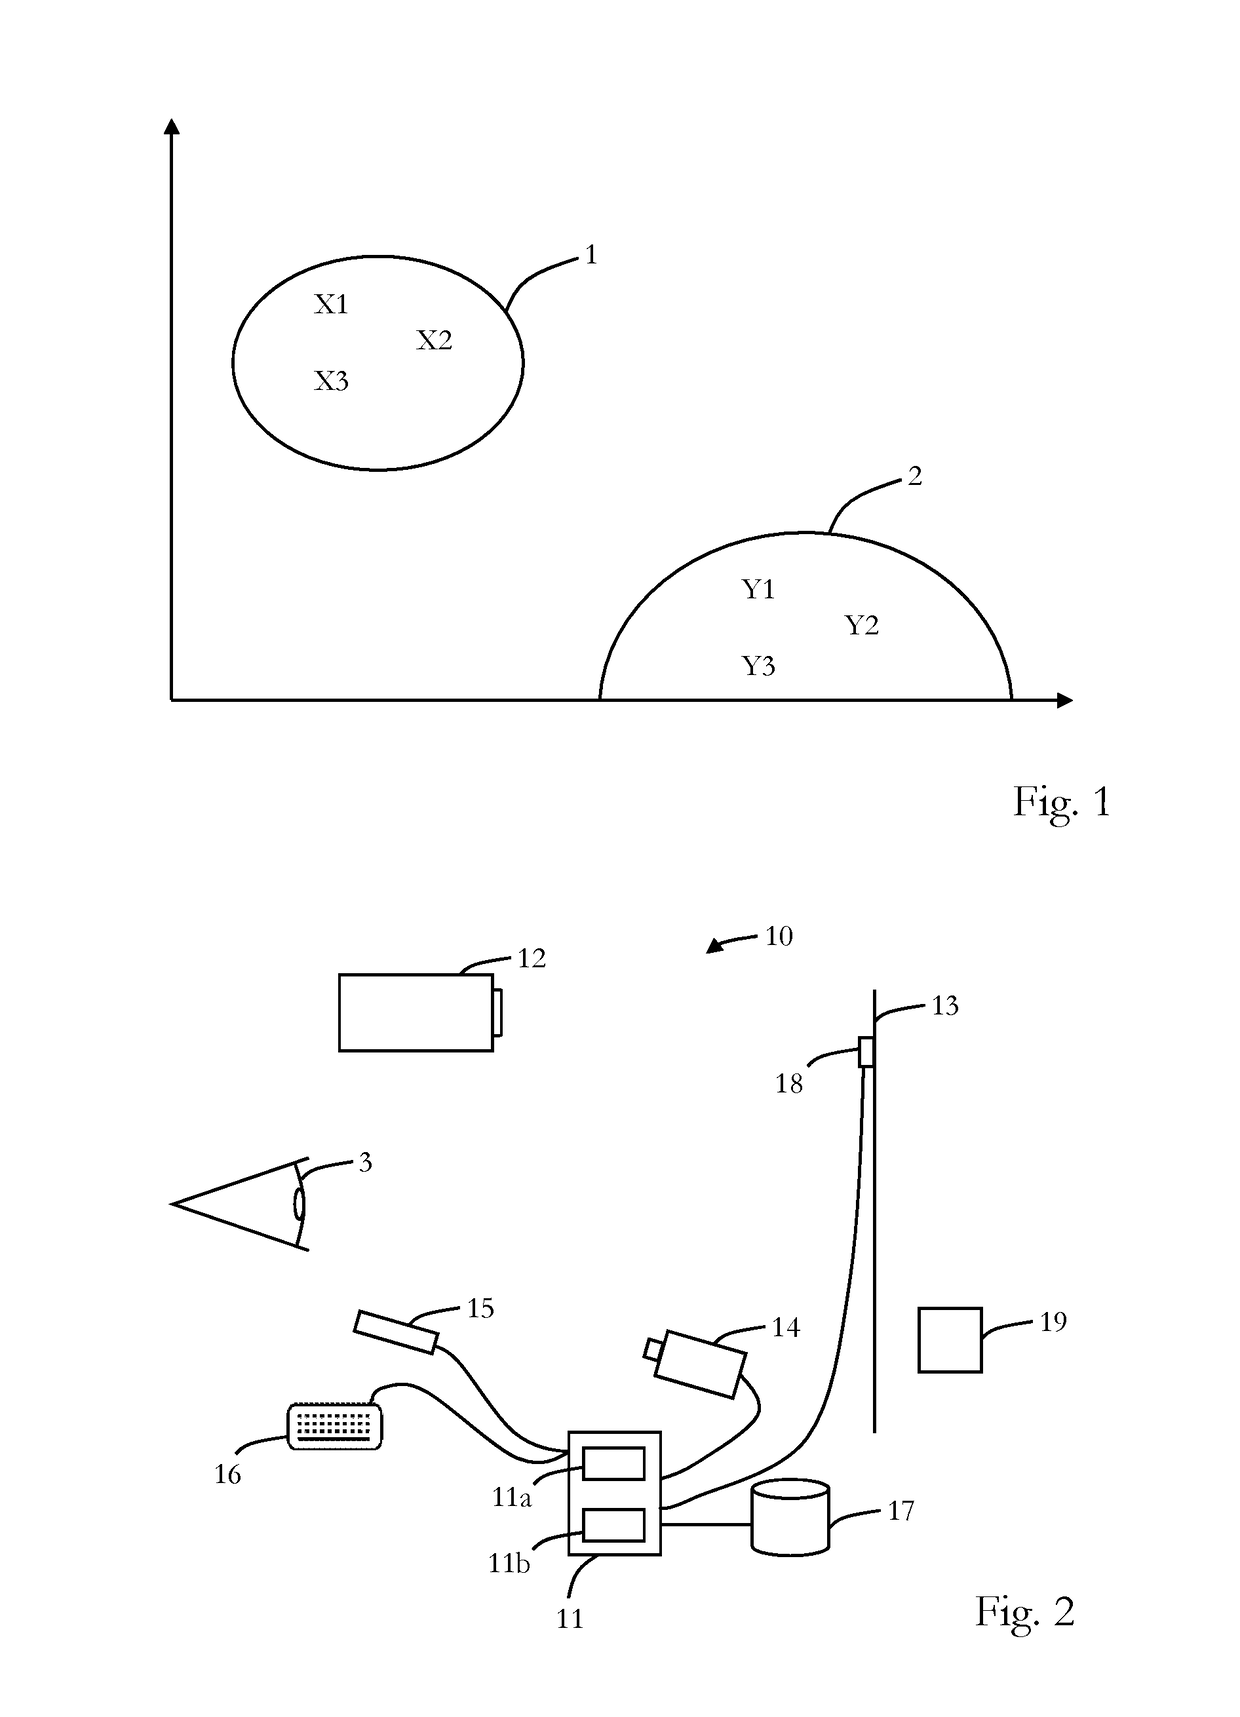 Main module, system and method for self-examination of a user's eye